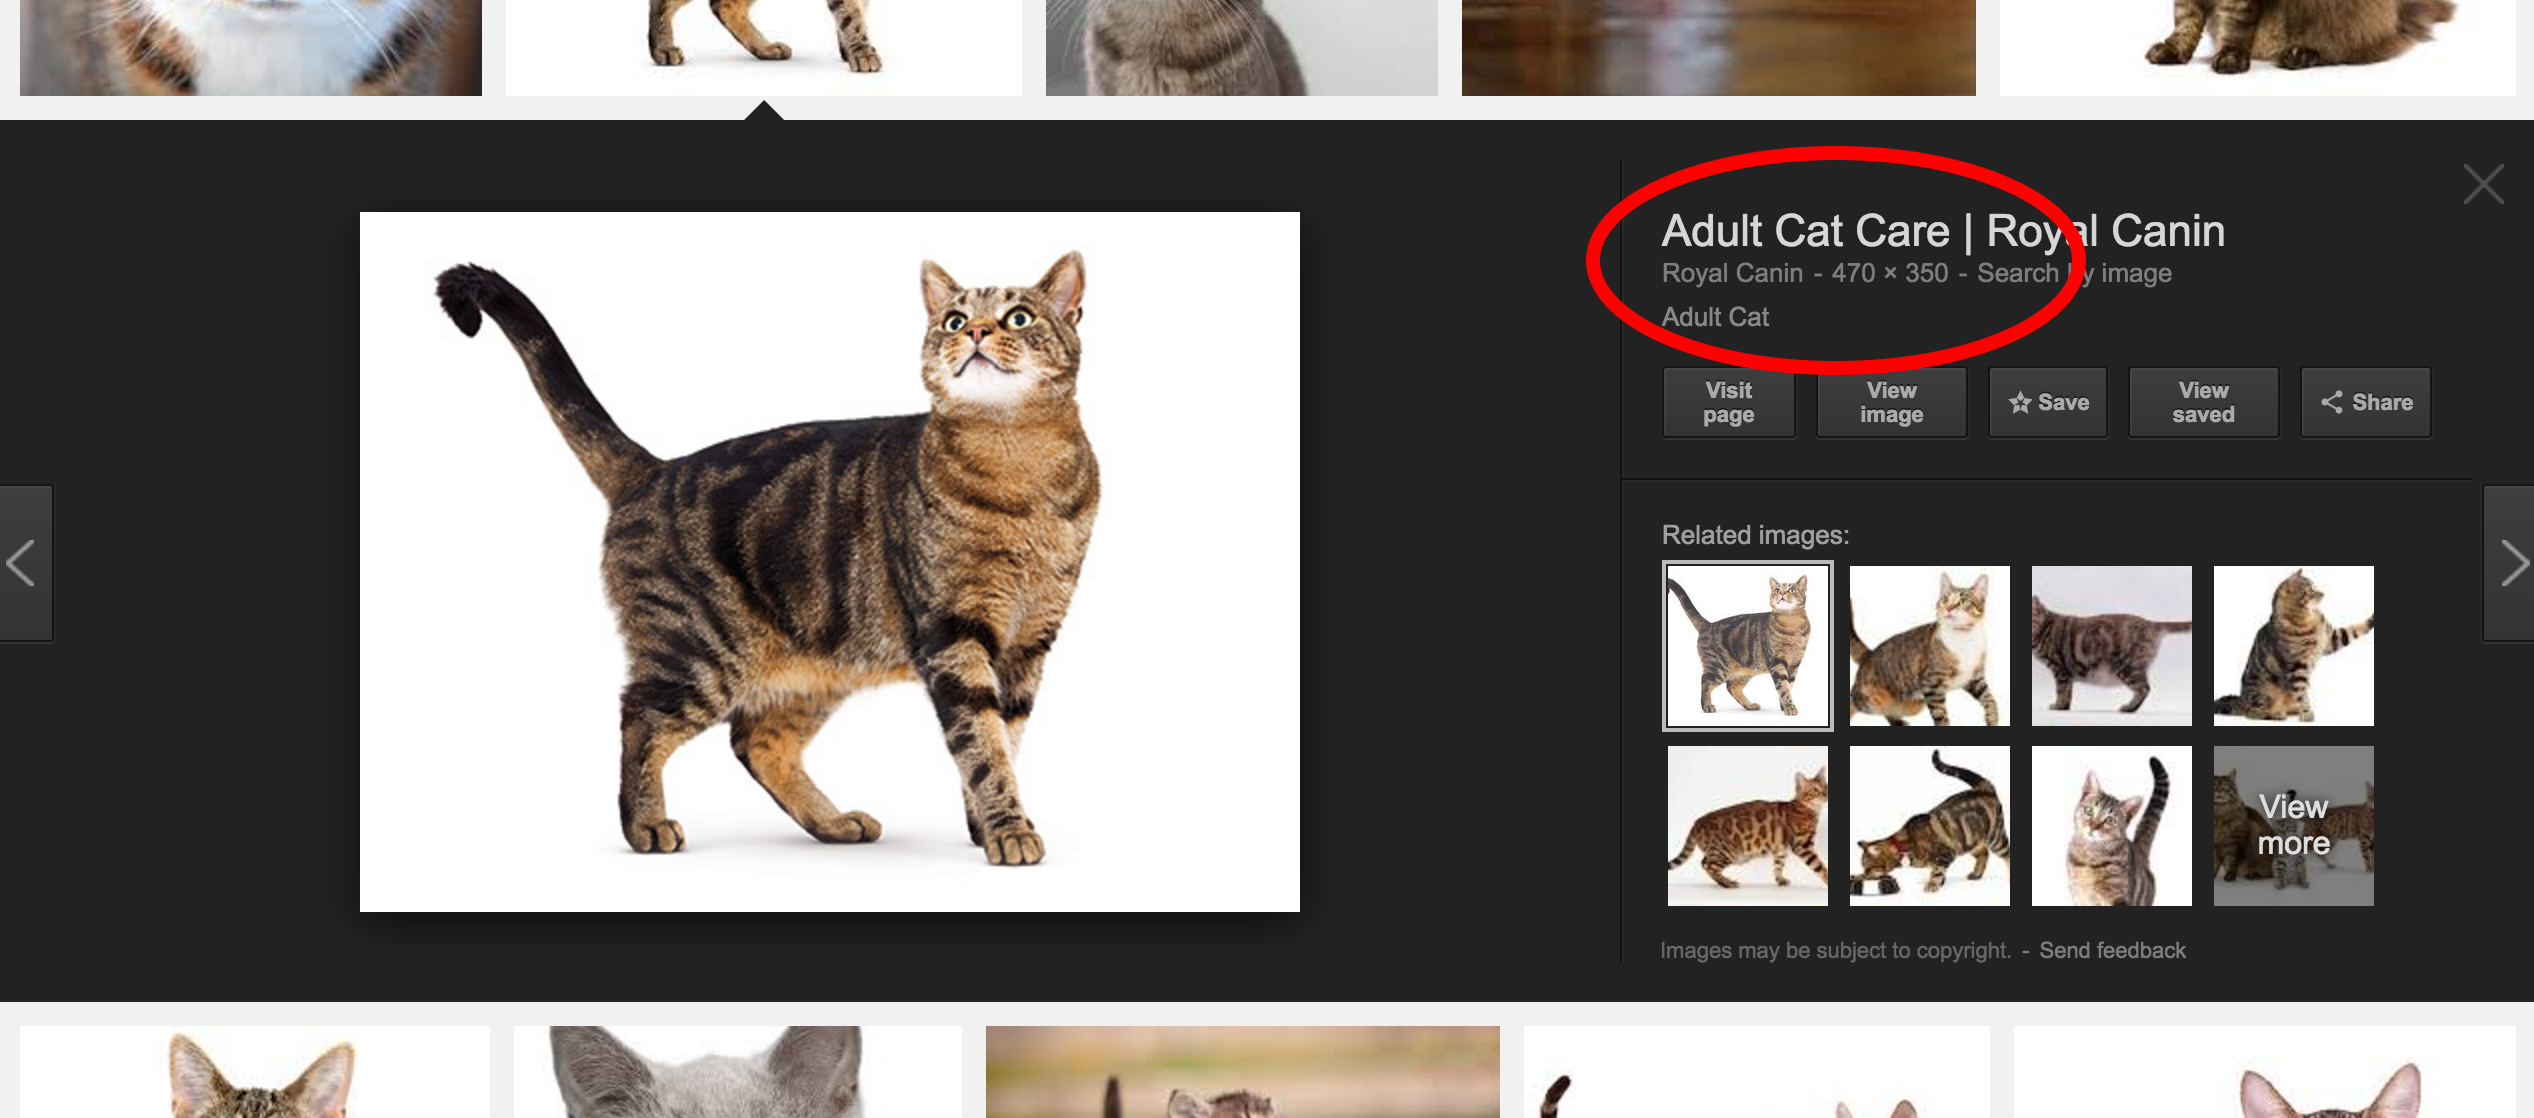 Checking image resolution in Google Images